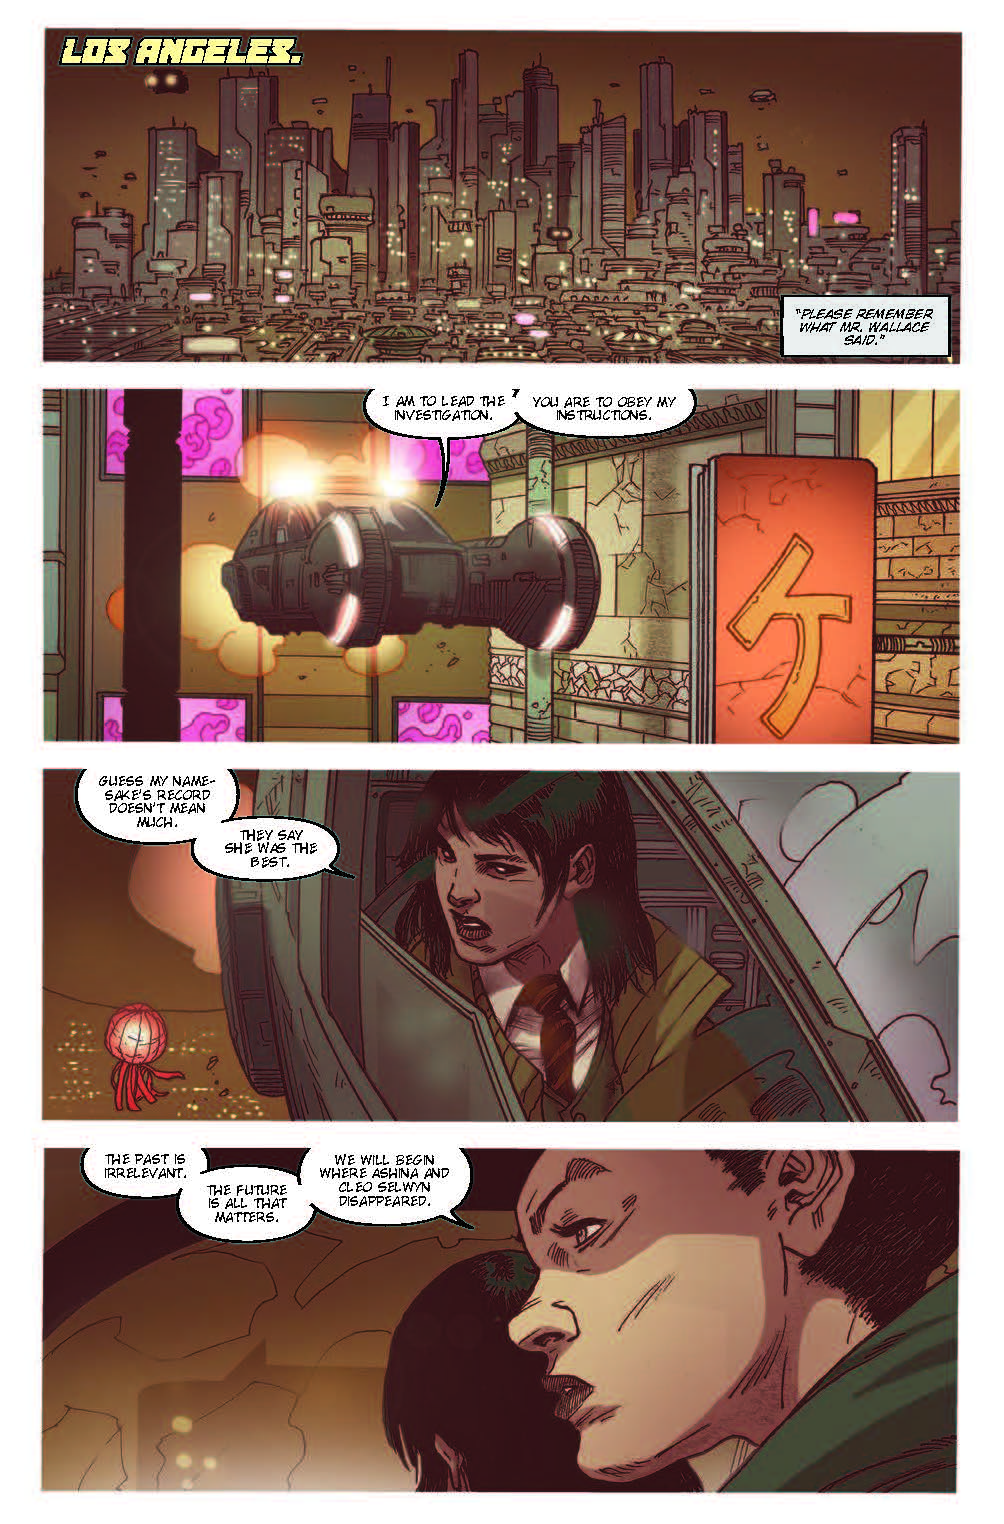 Rash and Luv talk while in a Spinner; Blade Runner 2039 #6. Titan Comics. 2023.